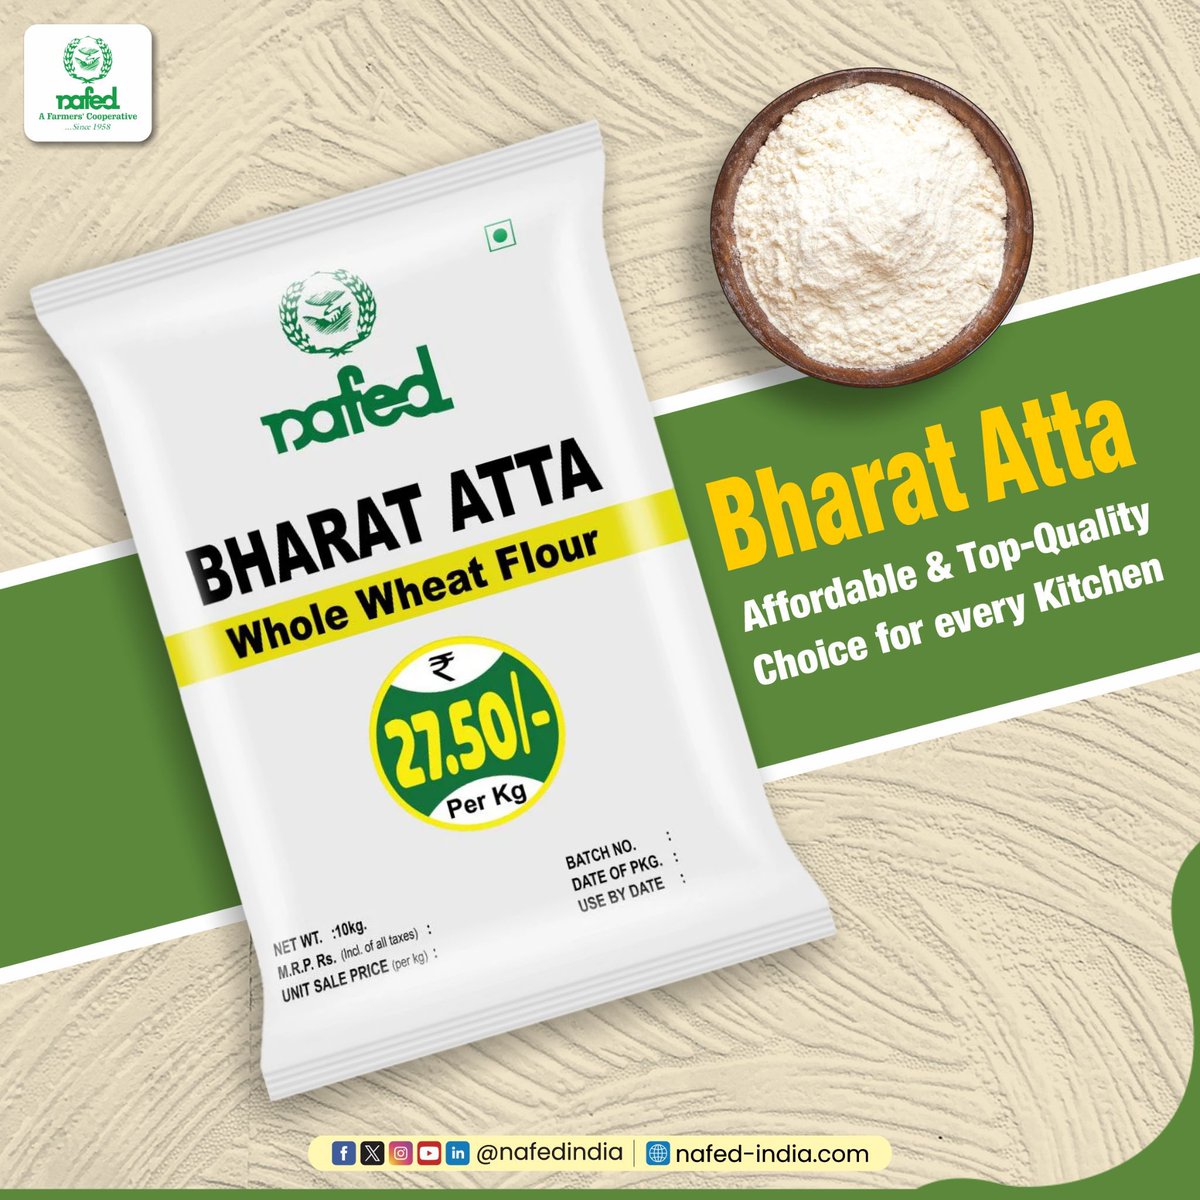 Enjoy perfectly soft rotis with Bharat Atta! Made from premium quality ingredients and at affordable price. Grab your pack of Bharat Atta today - nafedbazaar.com/product/nafed-…

#NAFED #NAFEDIndia #BharatBrand #Bharatatta #quality #India #farmers #agriculture